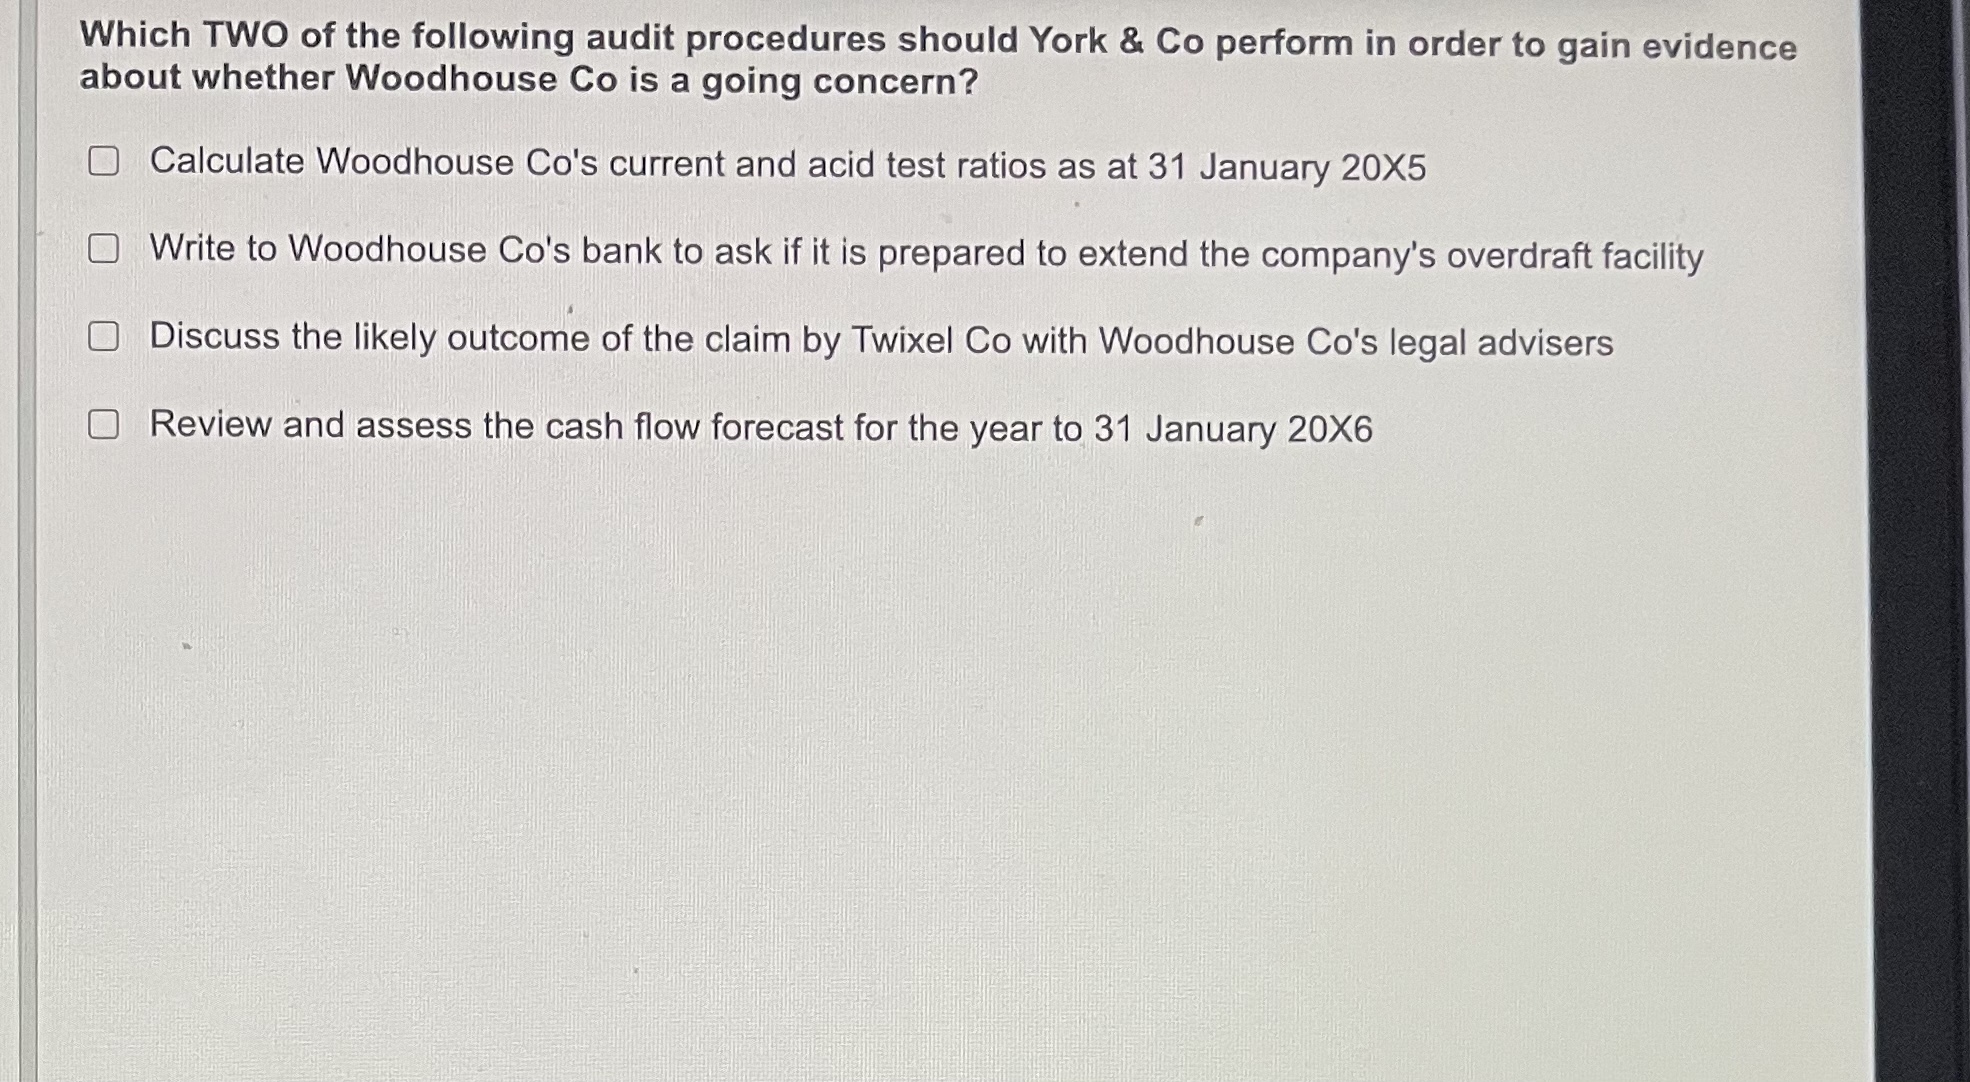 Which TWO of the following audit procedures should York & Co perform in order to gain evidence about whether